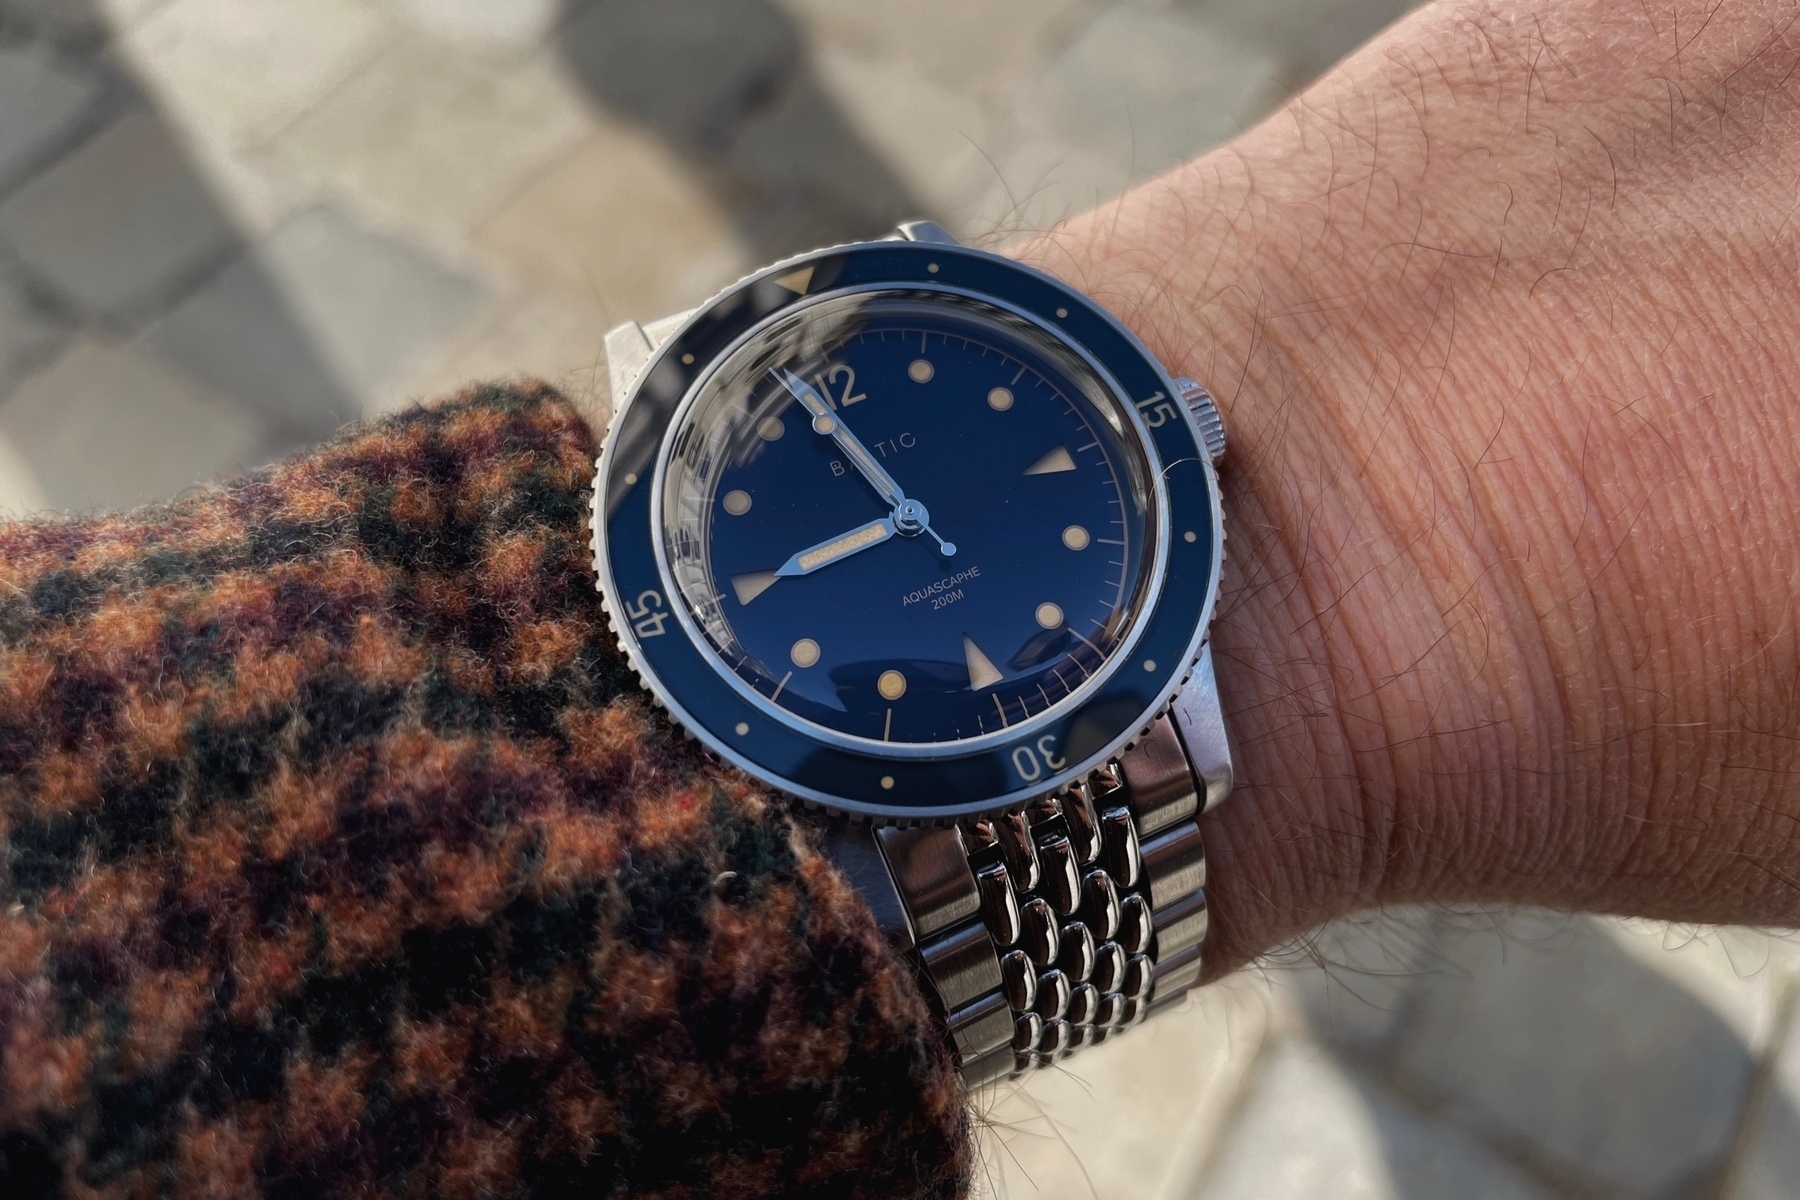 Man’s arm with a brown flannel shirt sleeve and a dive watch from Baltic with a steel band and a blue dial.